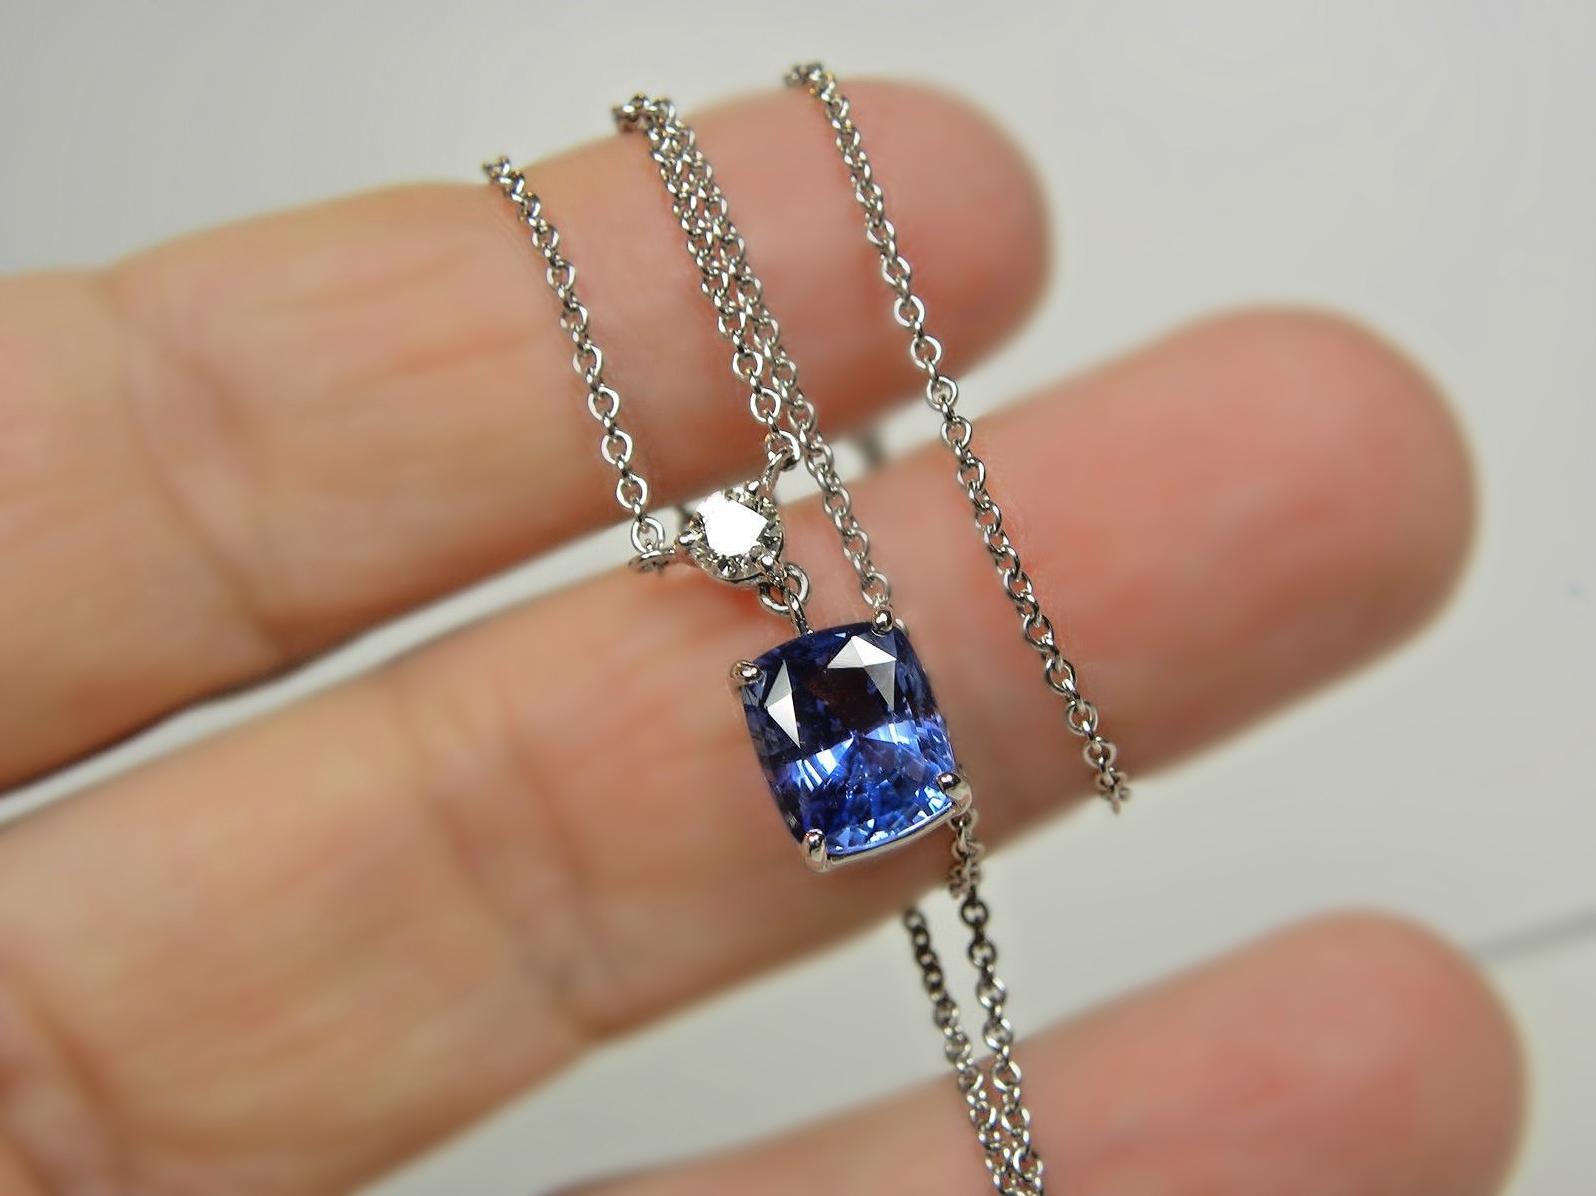 Primary Stones: Ceylon Sapphire
Shape or Cut : Cushion Cut
Average Color/Clarity : Cornflower Blue/ Clarity VS
Total Sapphire Weight : 3.90 Carats 
Total Diamond Weight: Round Cut/ .25ct H-VS1 
Pendant Measurement: 18.00mmx 7.75mm 
Total Gemstone